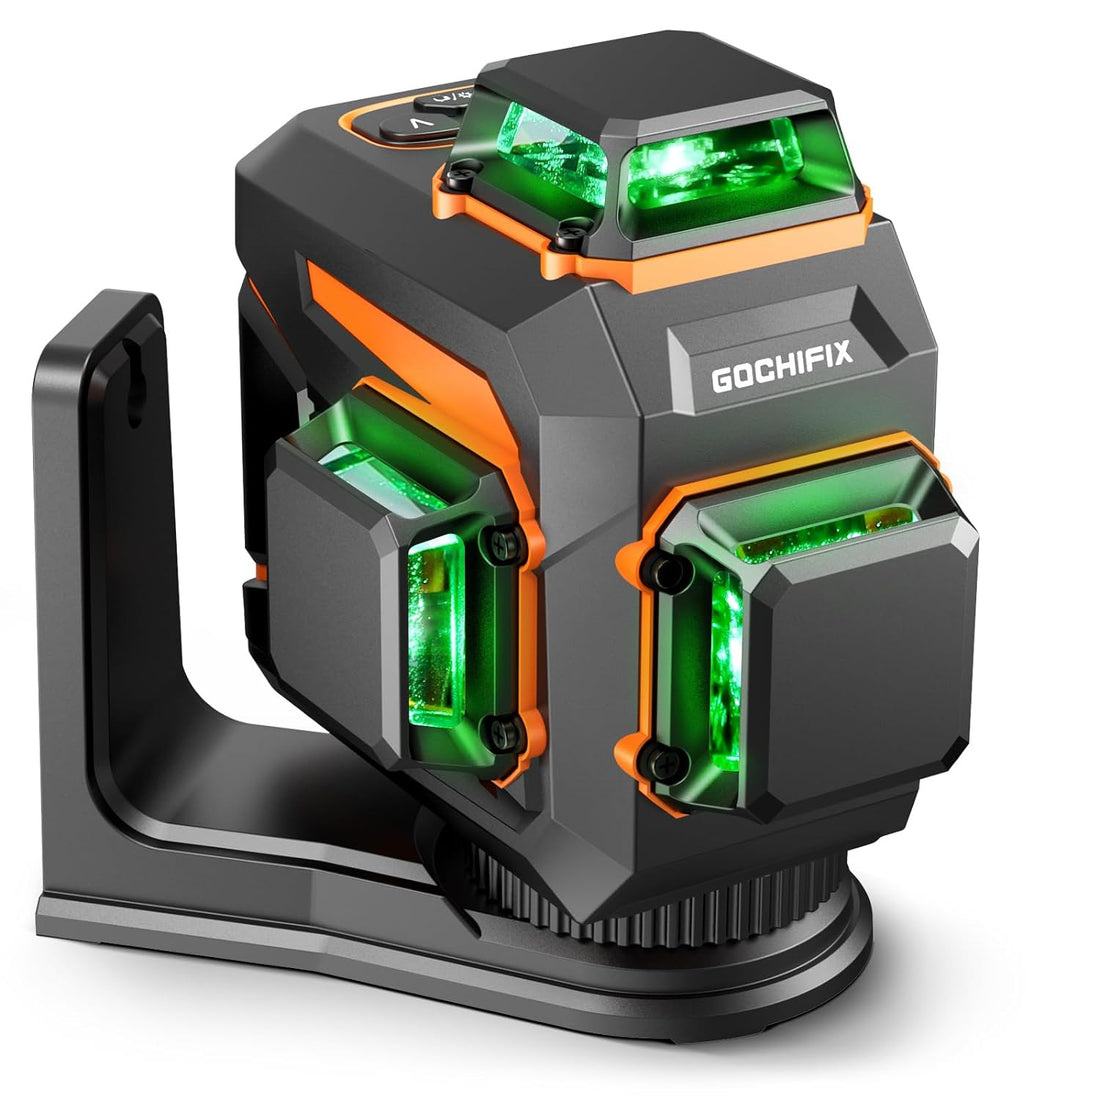 GOCHIFIX 12-Line Self-Leveling Green Laser Level with 3x360° Line Coverage